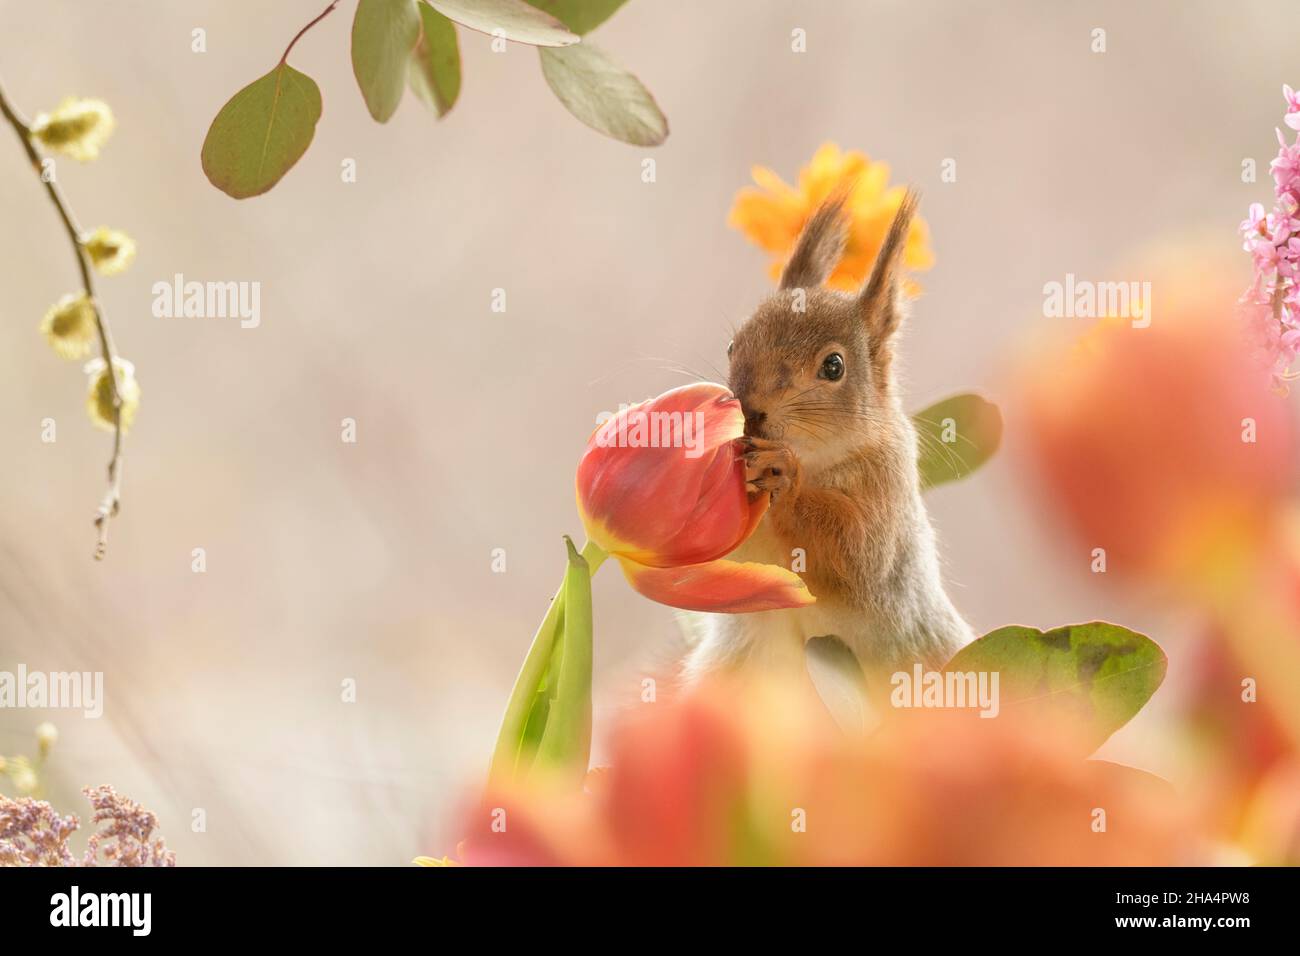 red squirrel is holding a tulip between daphne and leaves looking away Stock Photo